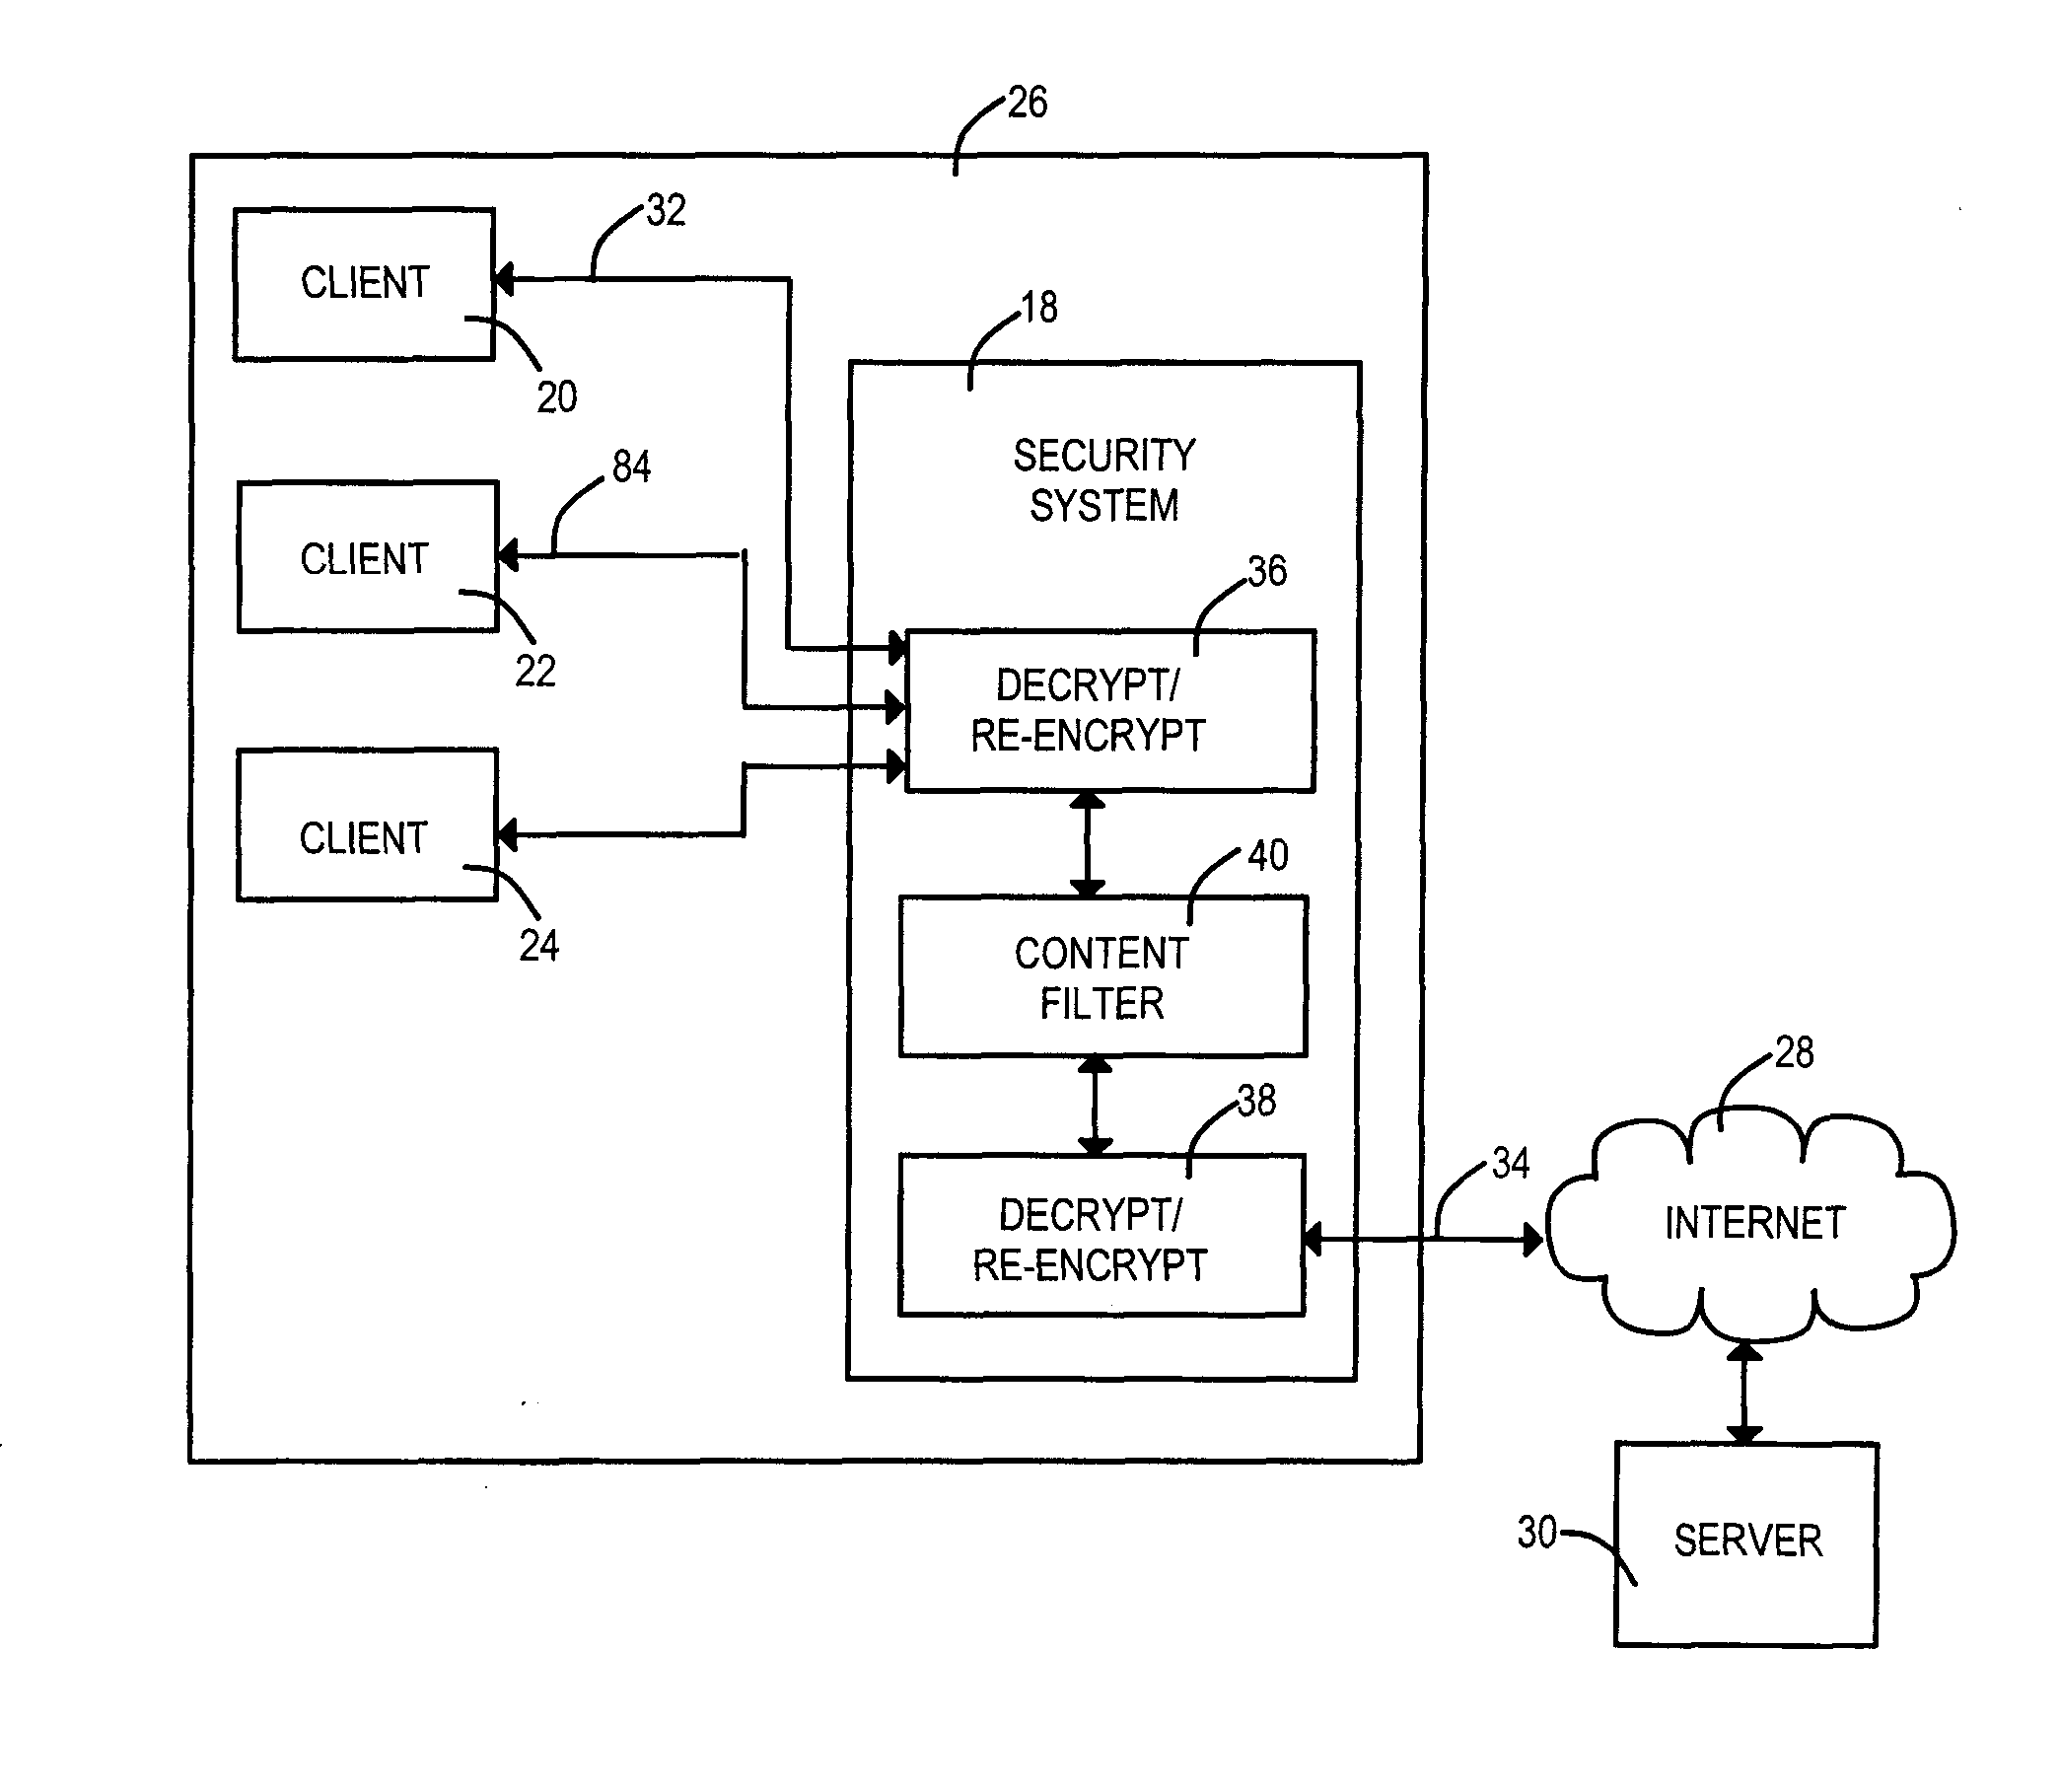 Tandem encryption connections to provide network traffic security method and apparatus